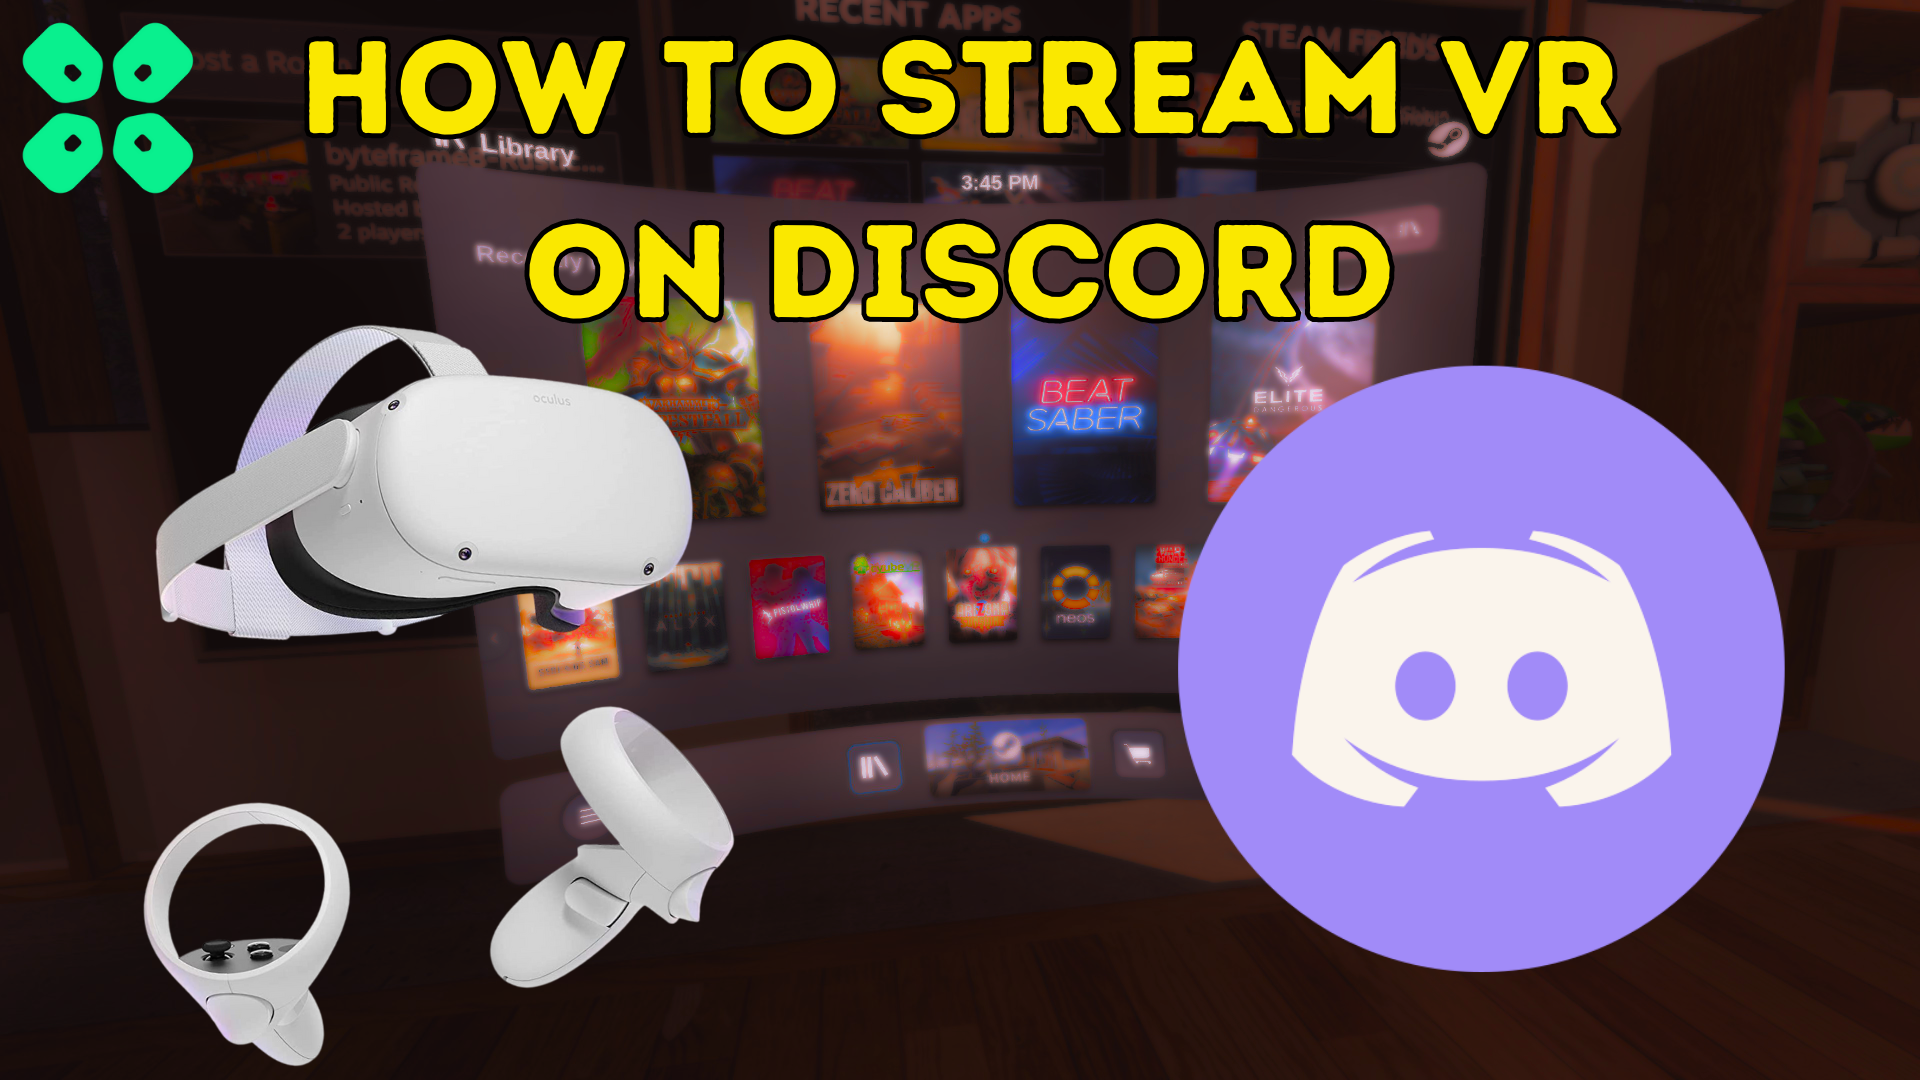 How to Stream VR on Discord